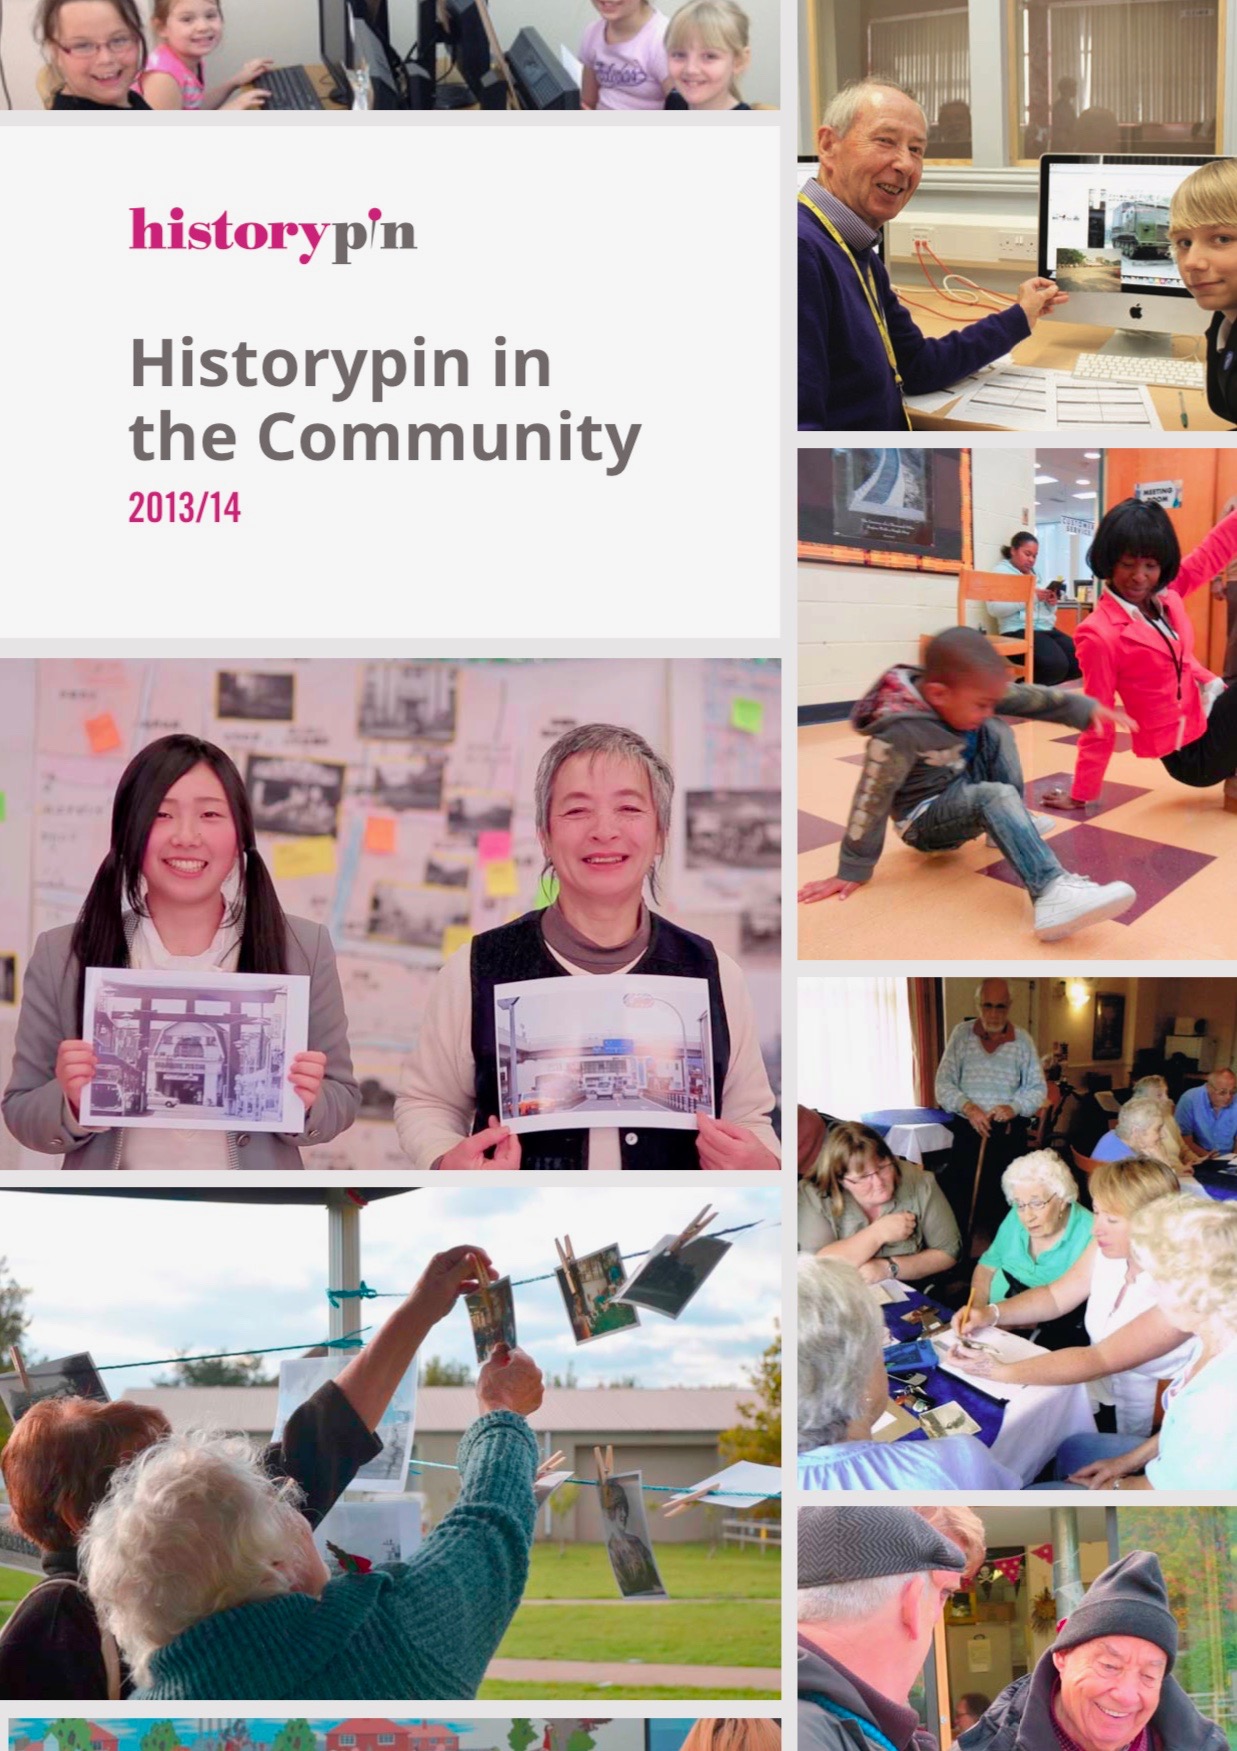 HISTORYPIN IN THE COMMUNITY (Publication)